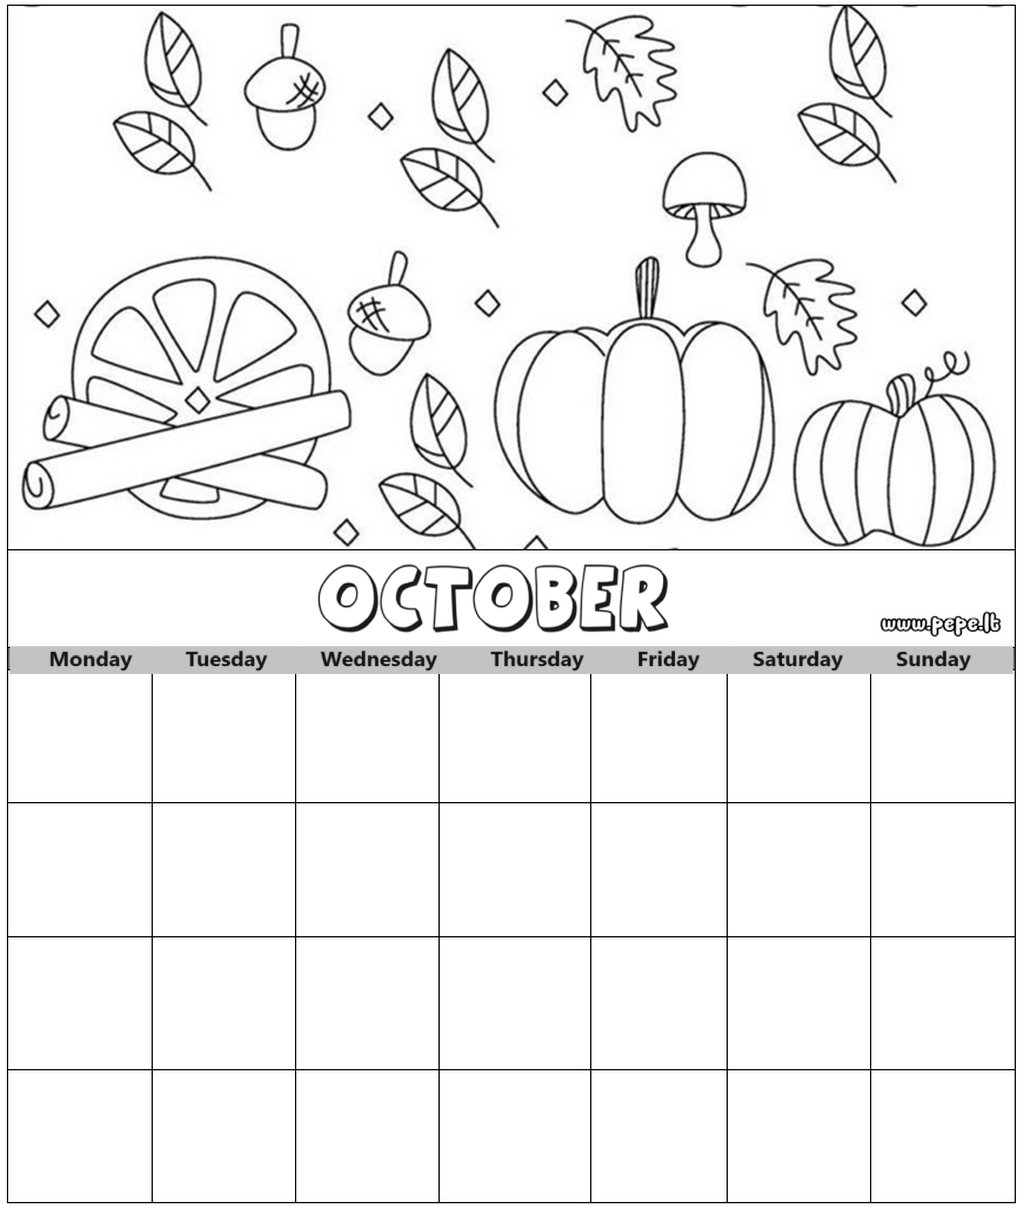 October monthly calendar coloring